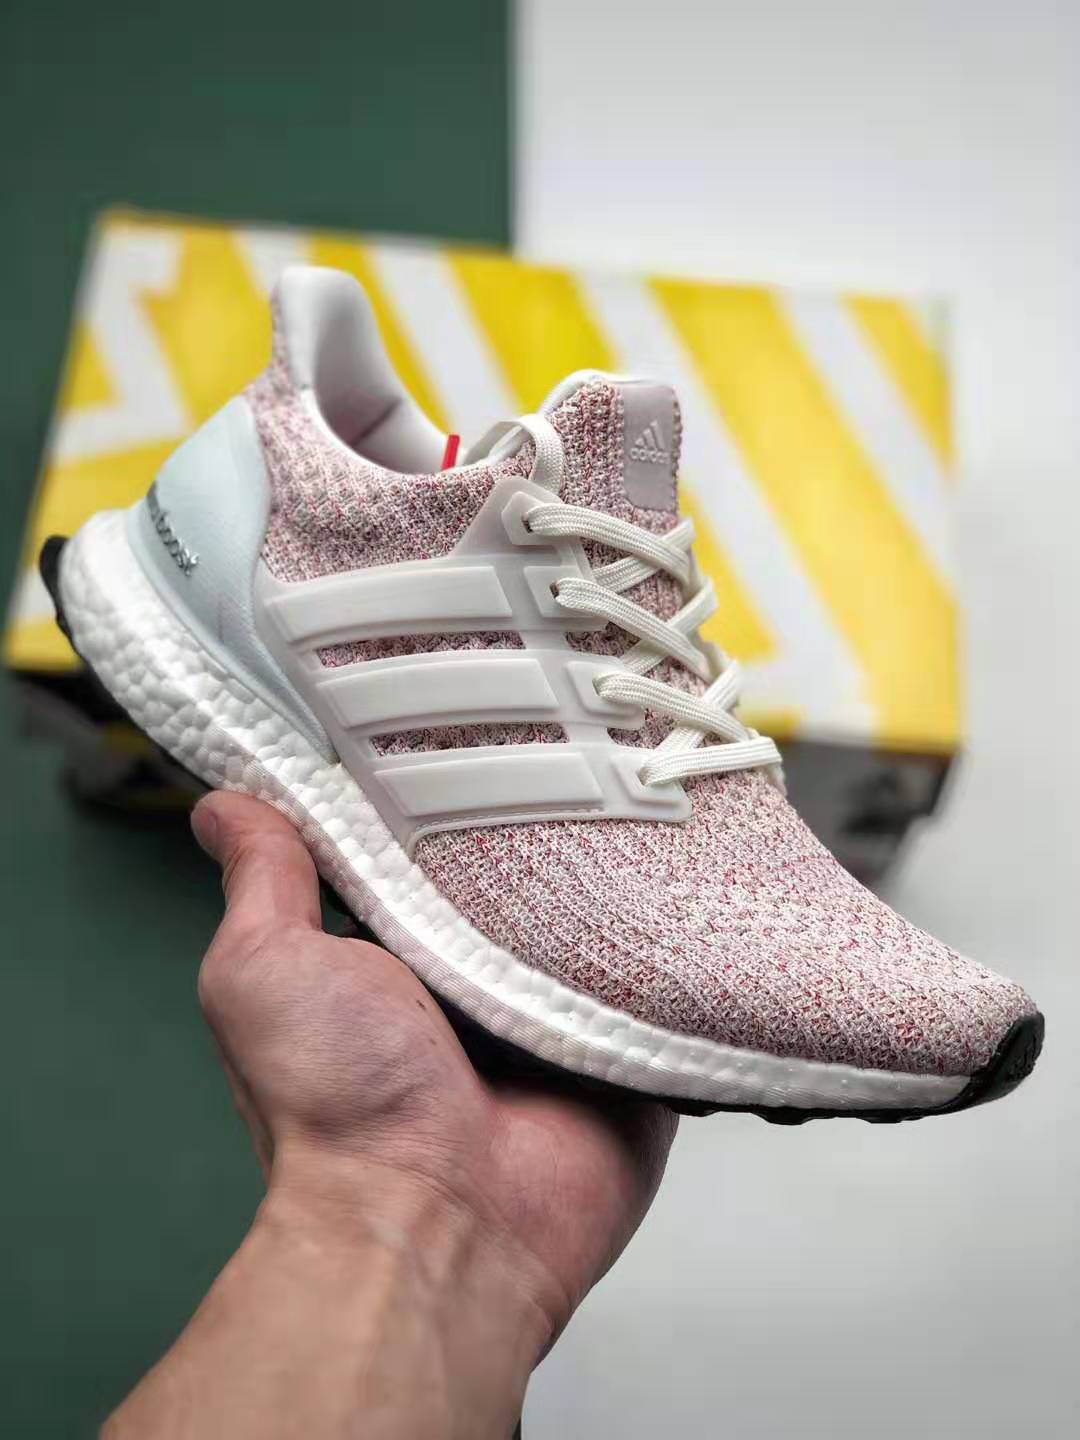 Adidas UltraBoost 4.0 'Candy Cane' BB6169 - Stylish and Comfortable Running Shoes